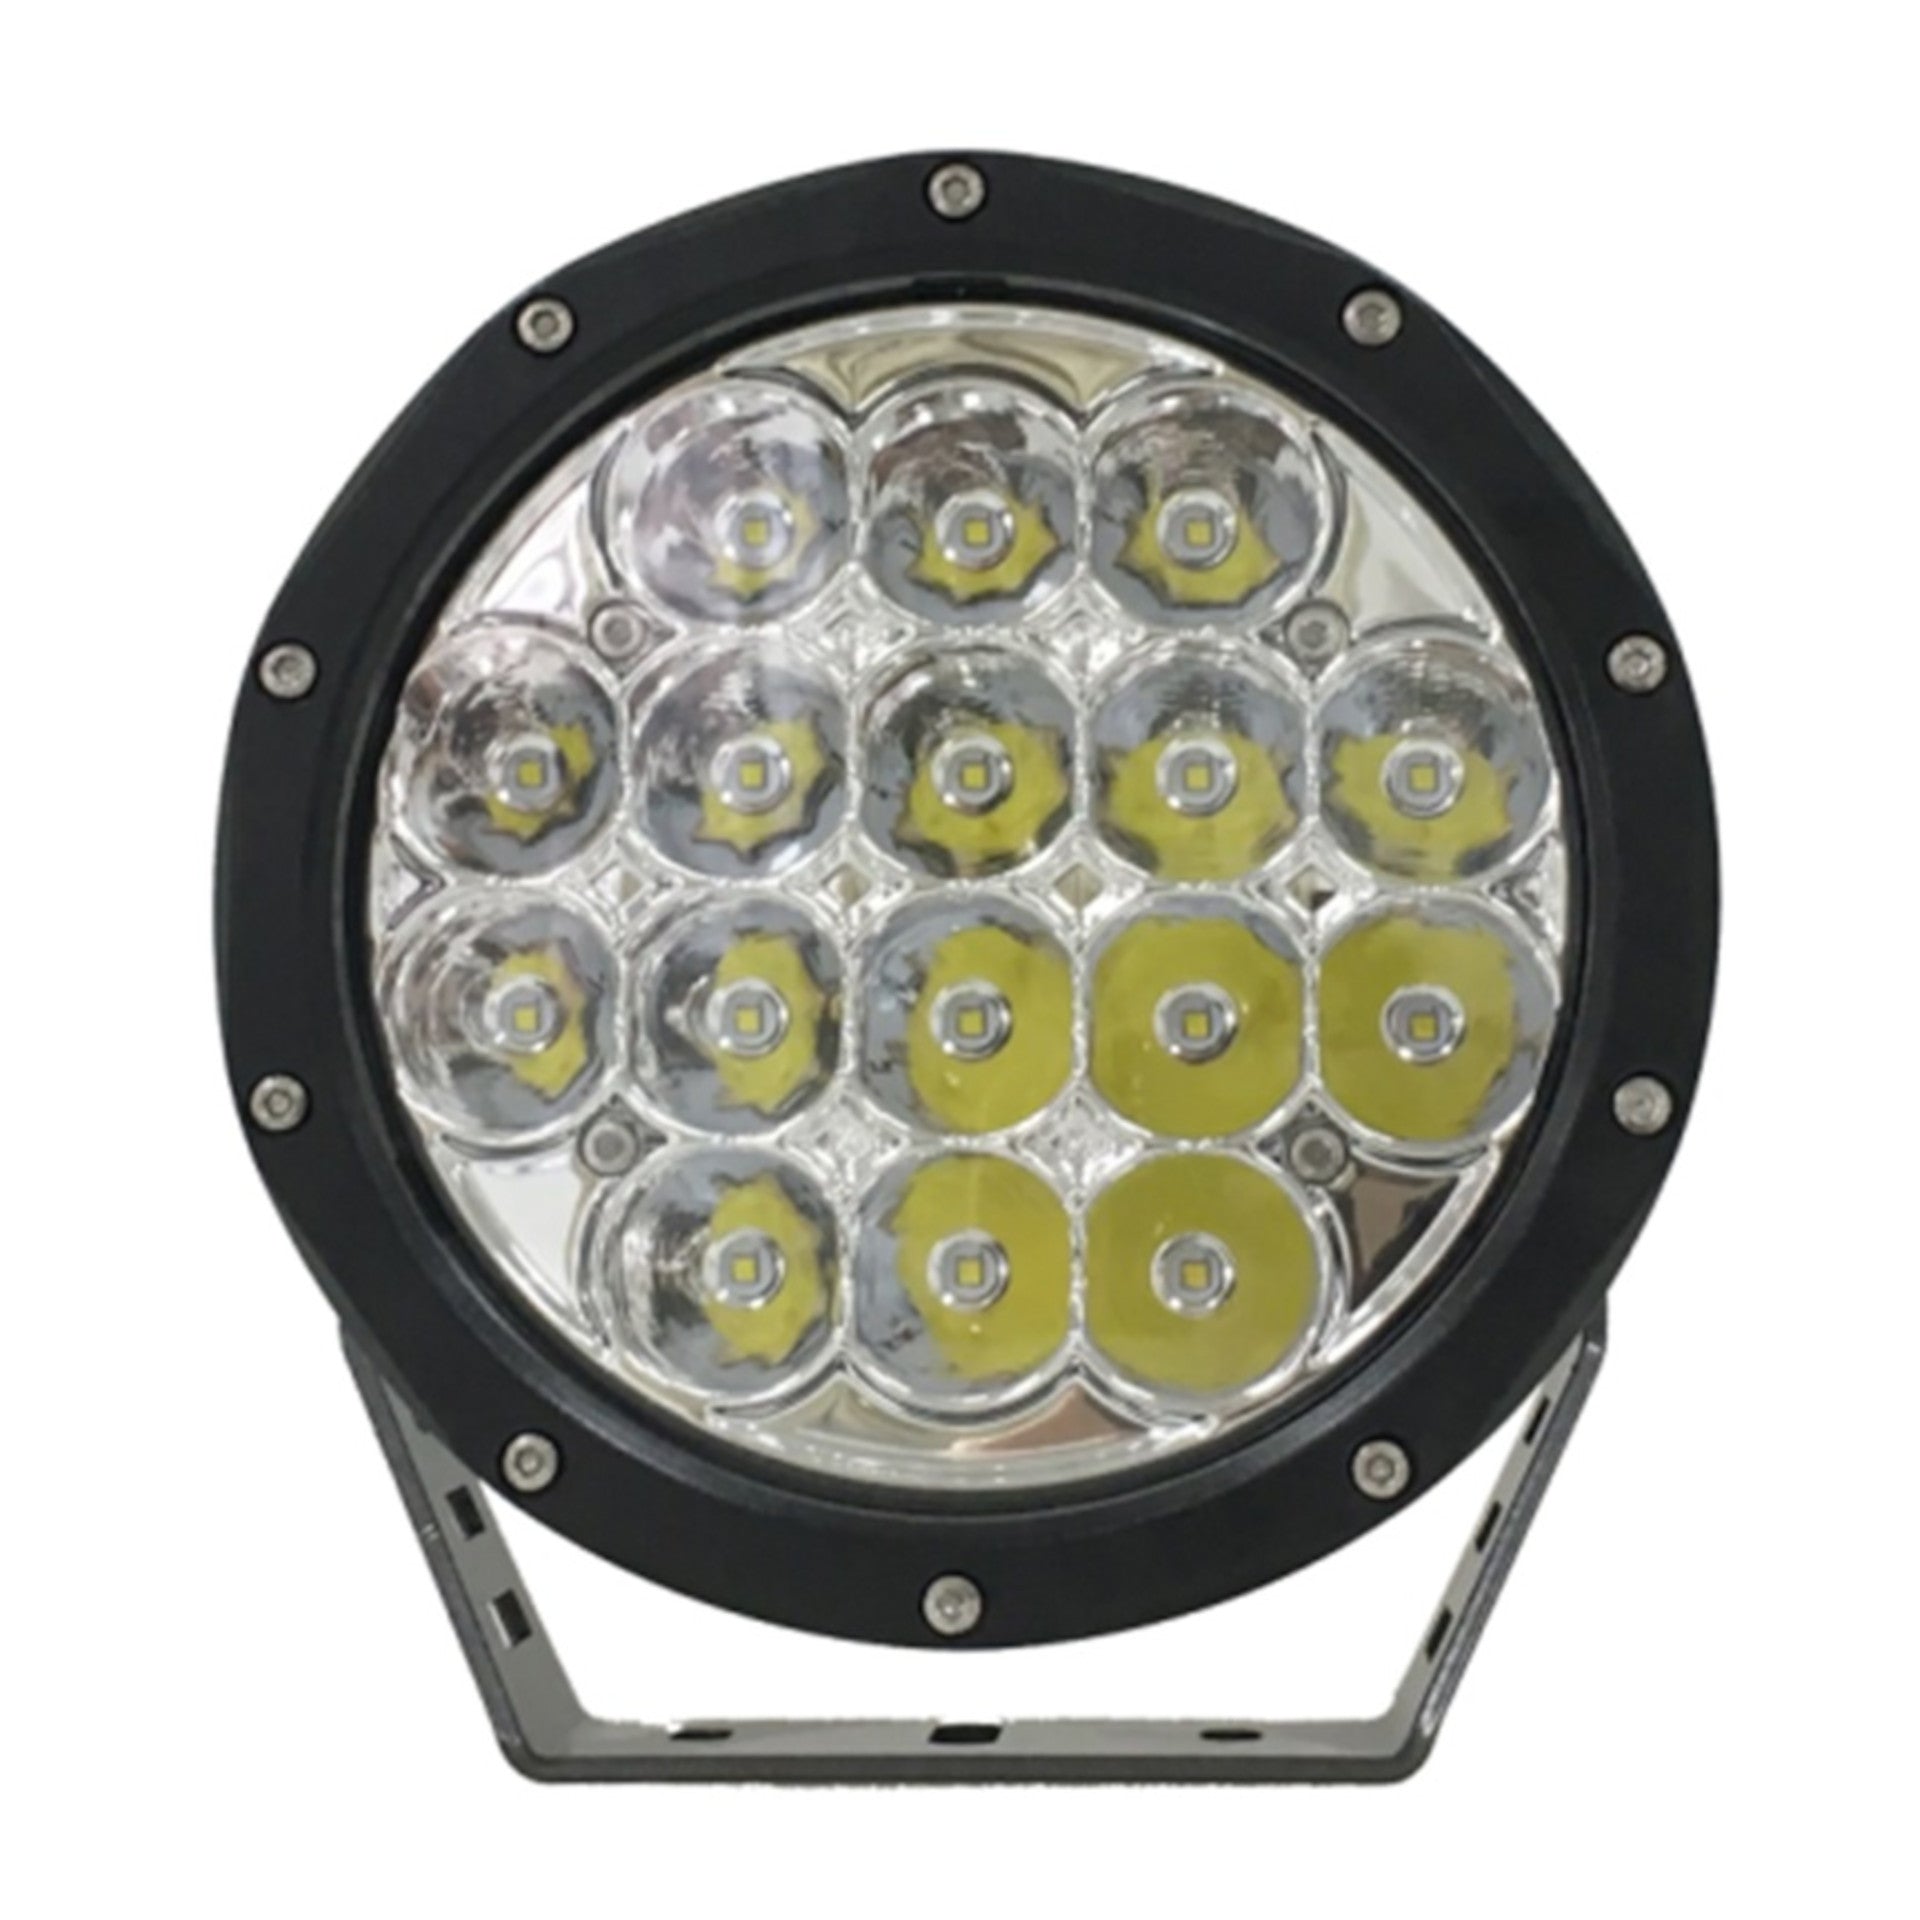 Universal Round 21LED x 5W OSRAM LED Driving Spotlight -  - sold by Direct4x4